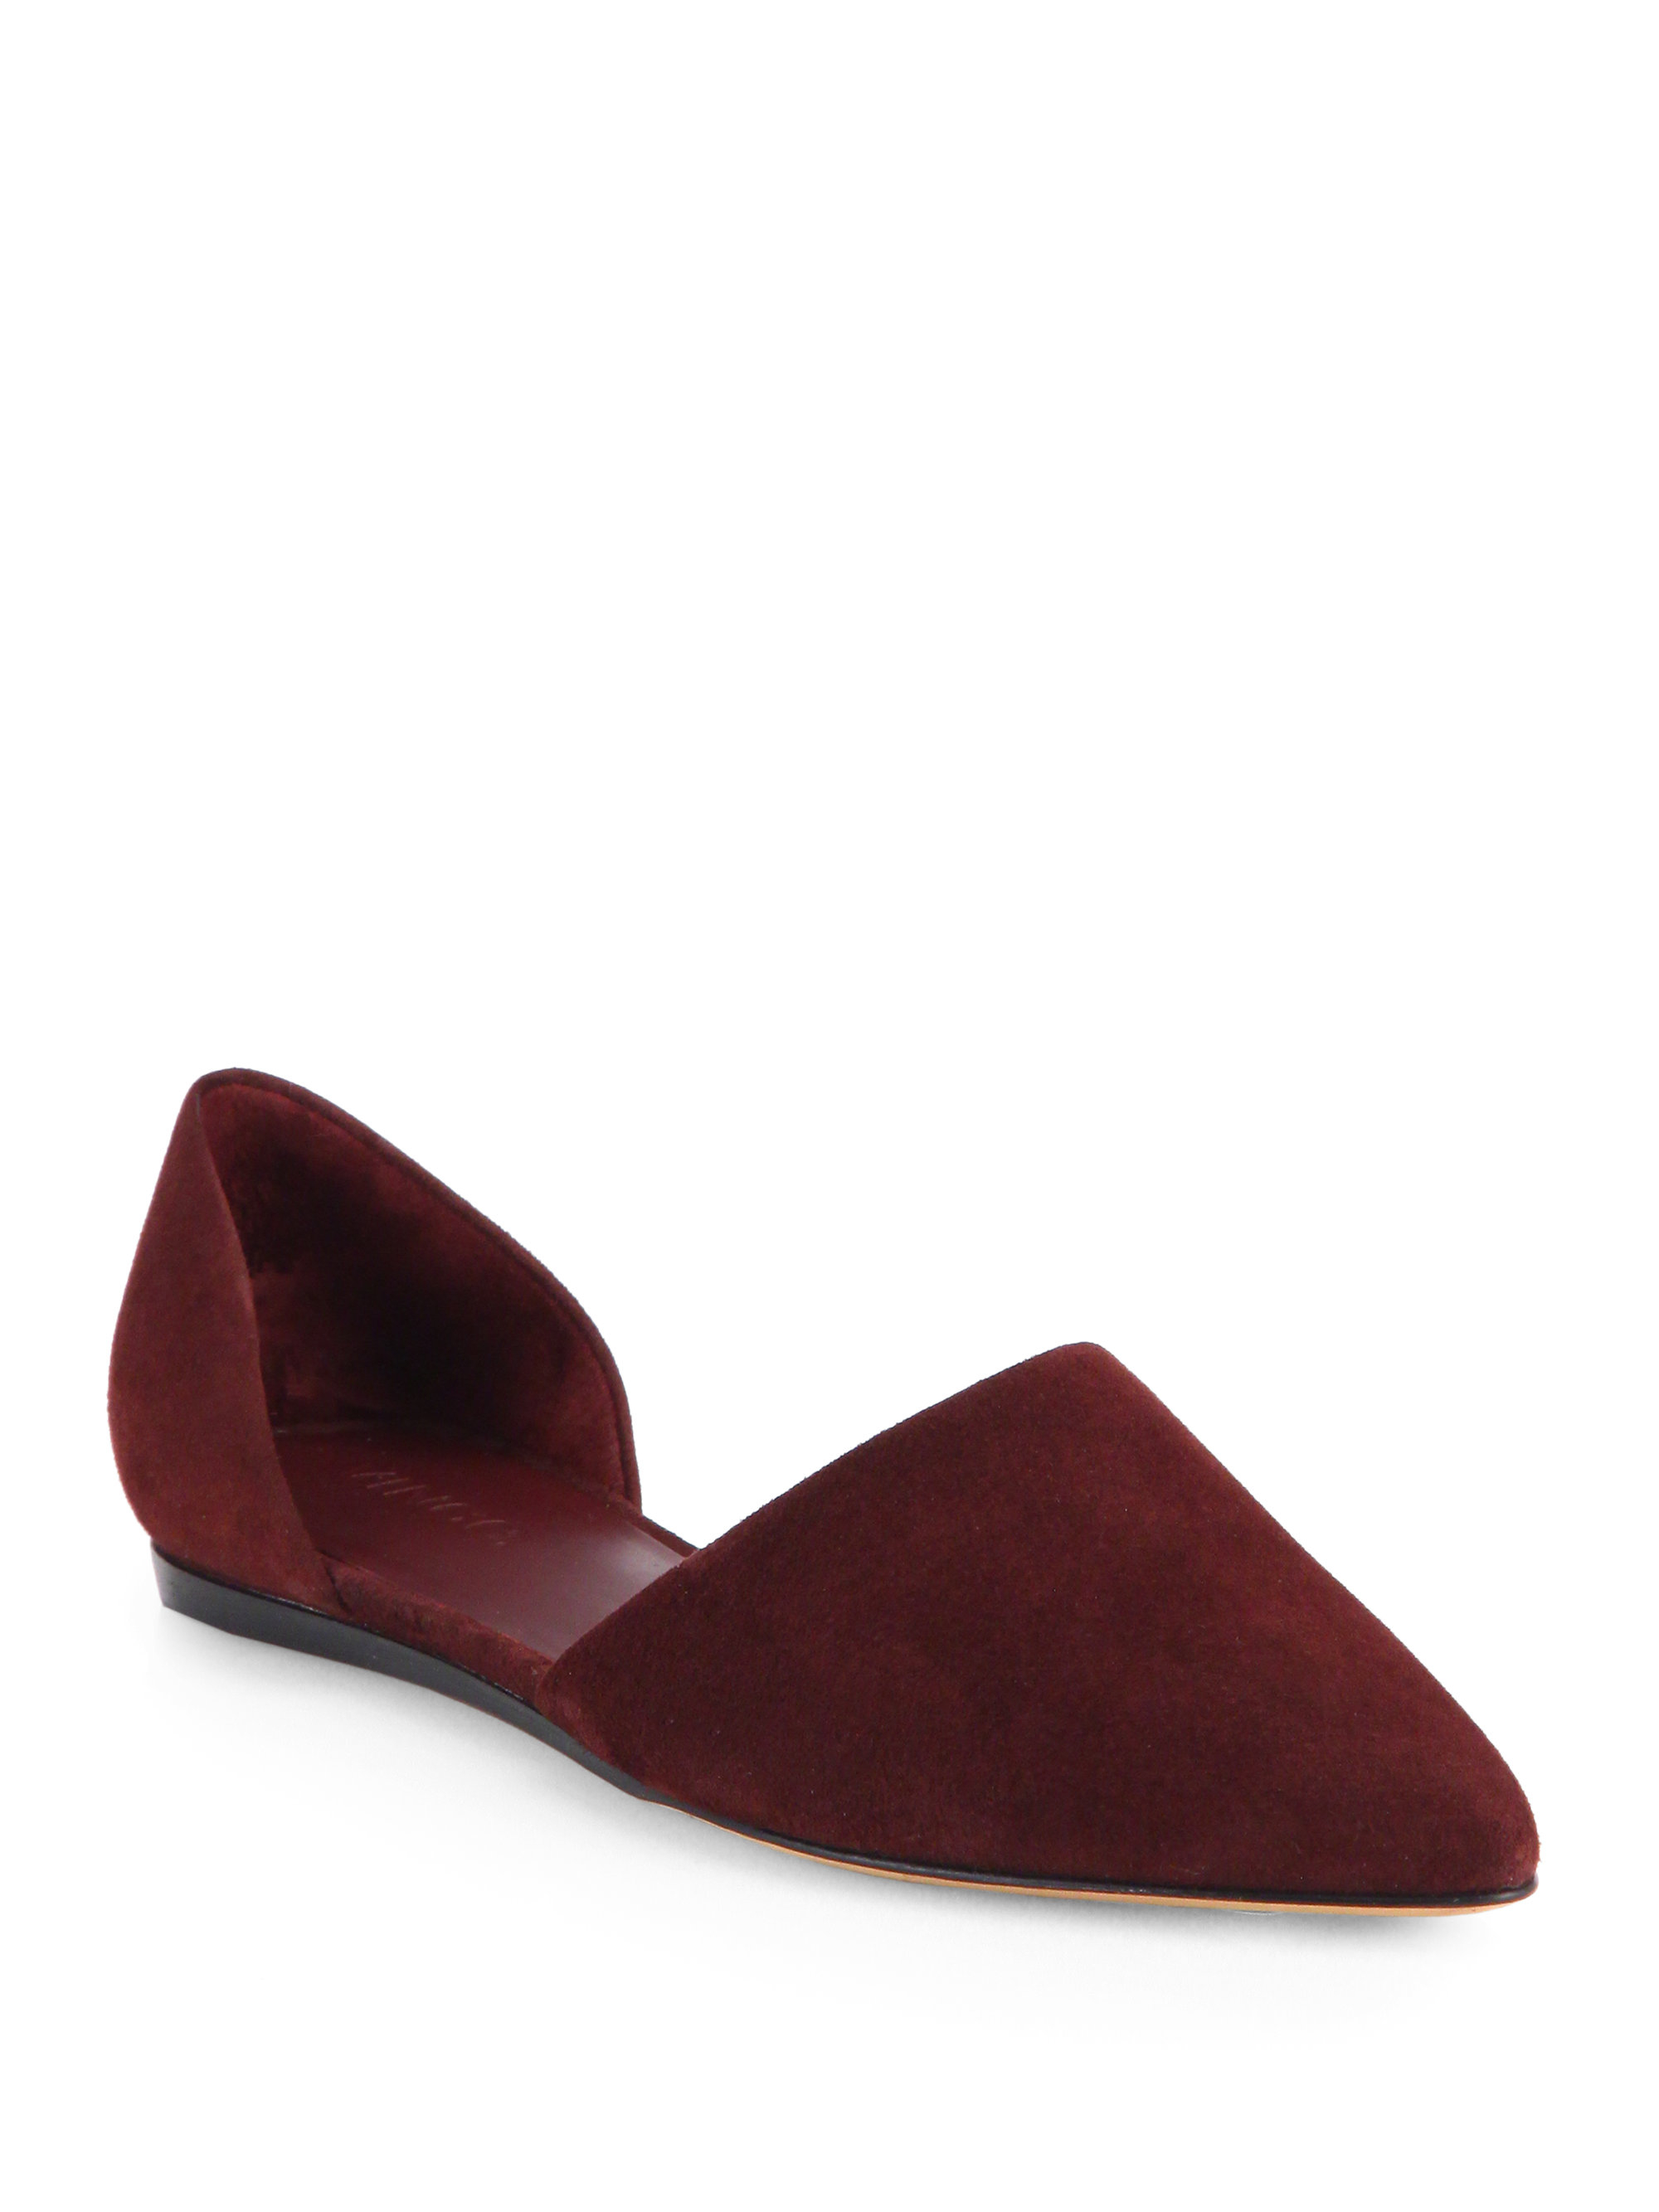 Lyst - Vince Nina Suede D'Orsay Flats in Purple